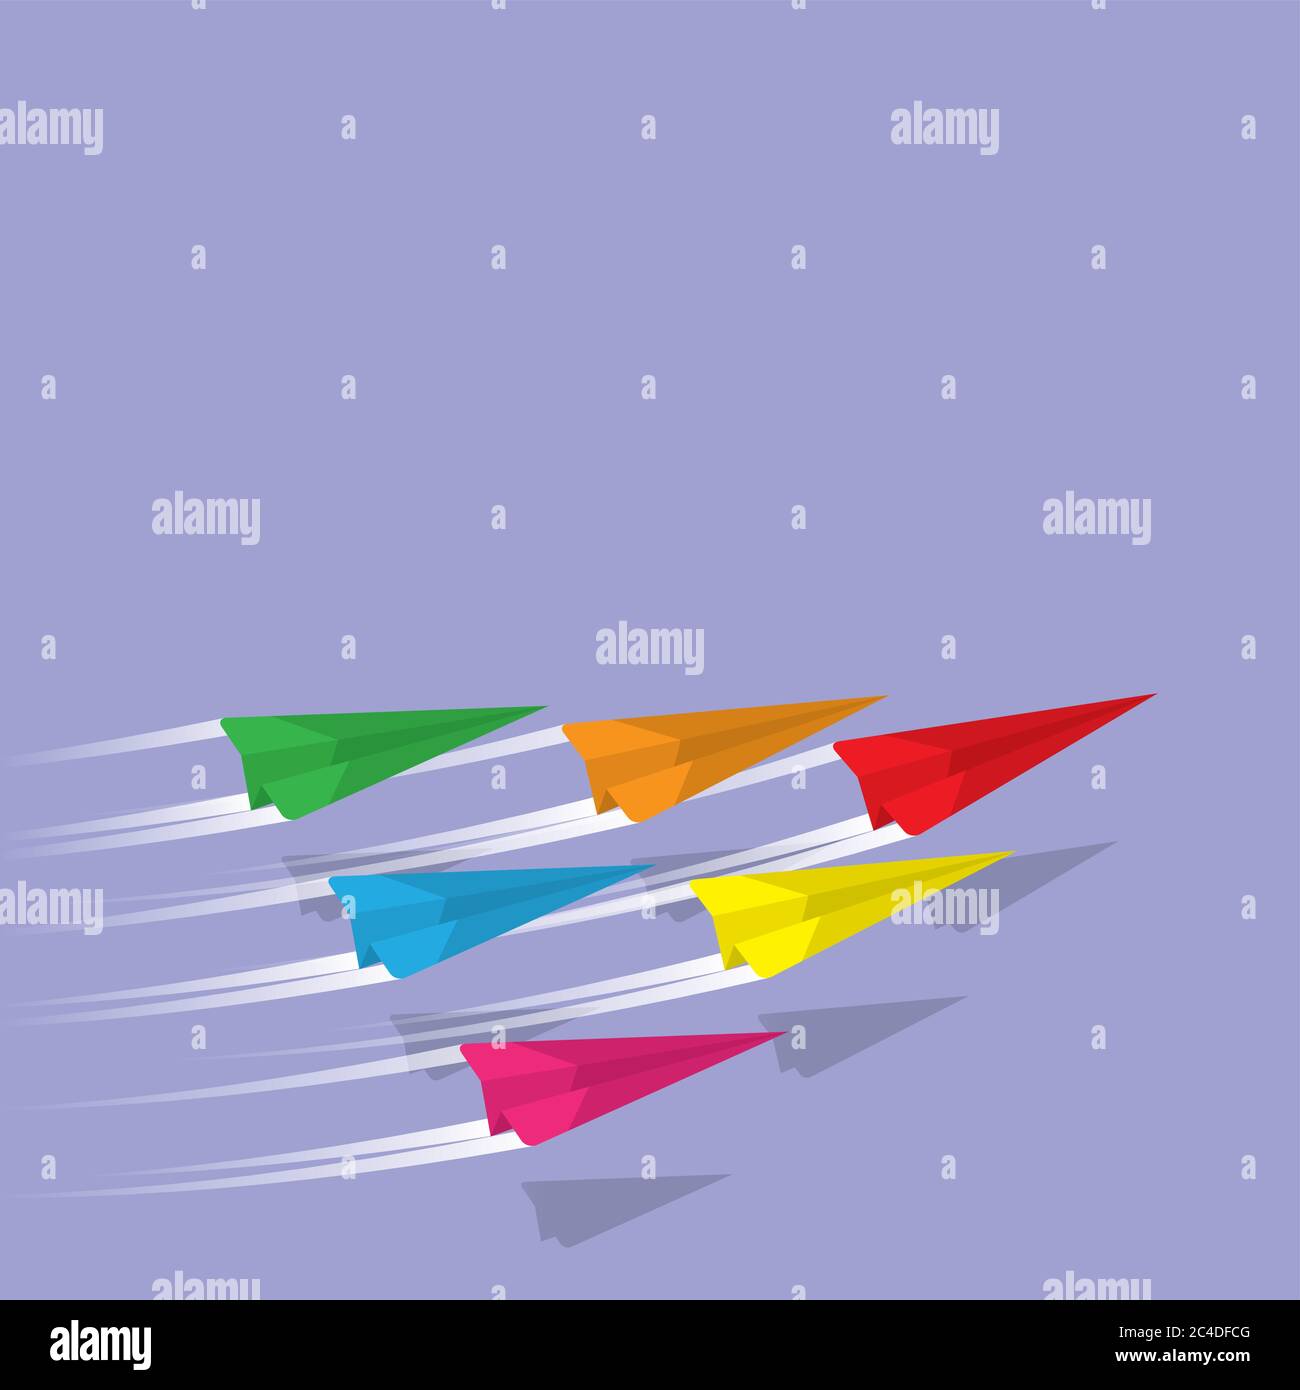 Group of simple paper planes flying as concept of unity in diversity Stock Vector